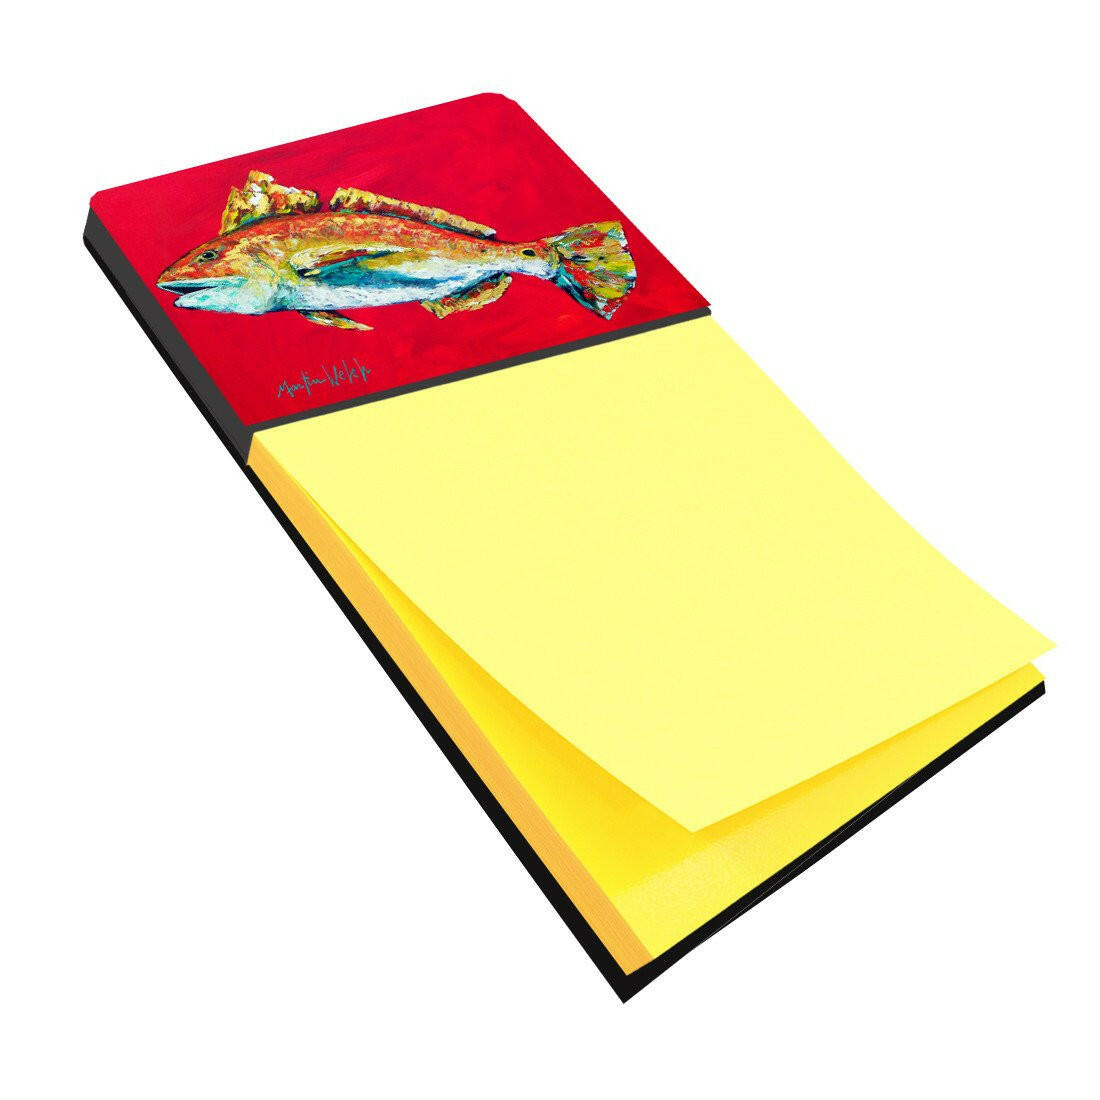 Fish - Red Fish Woo Hoo Refiillable Sticky Note Holder or Postit Note Dispenser MW1103SN by Caroline's Treasures